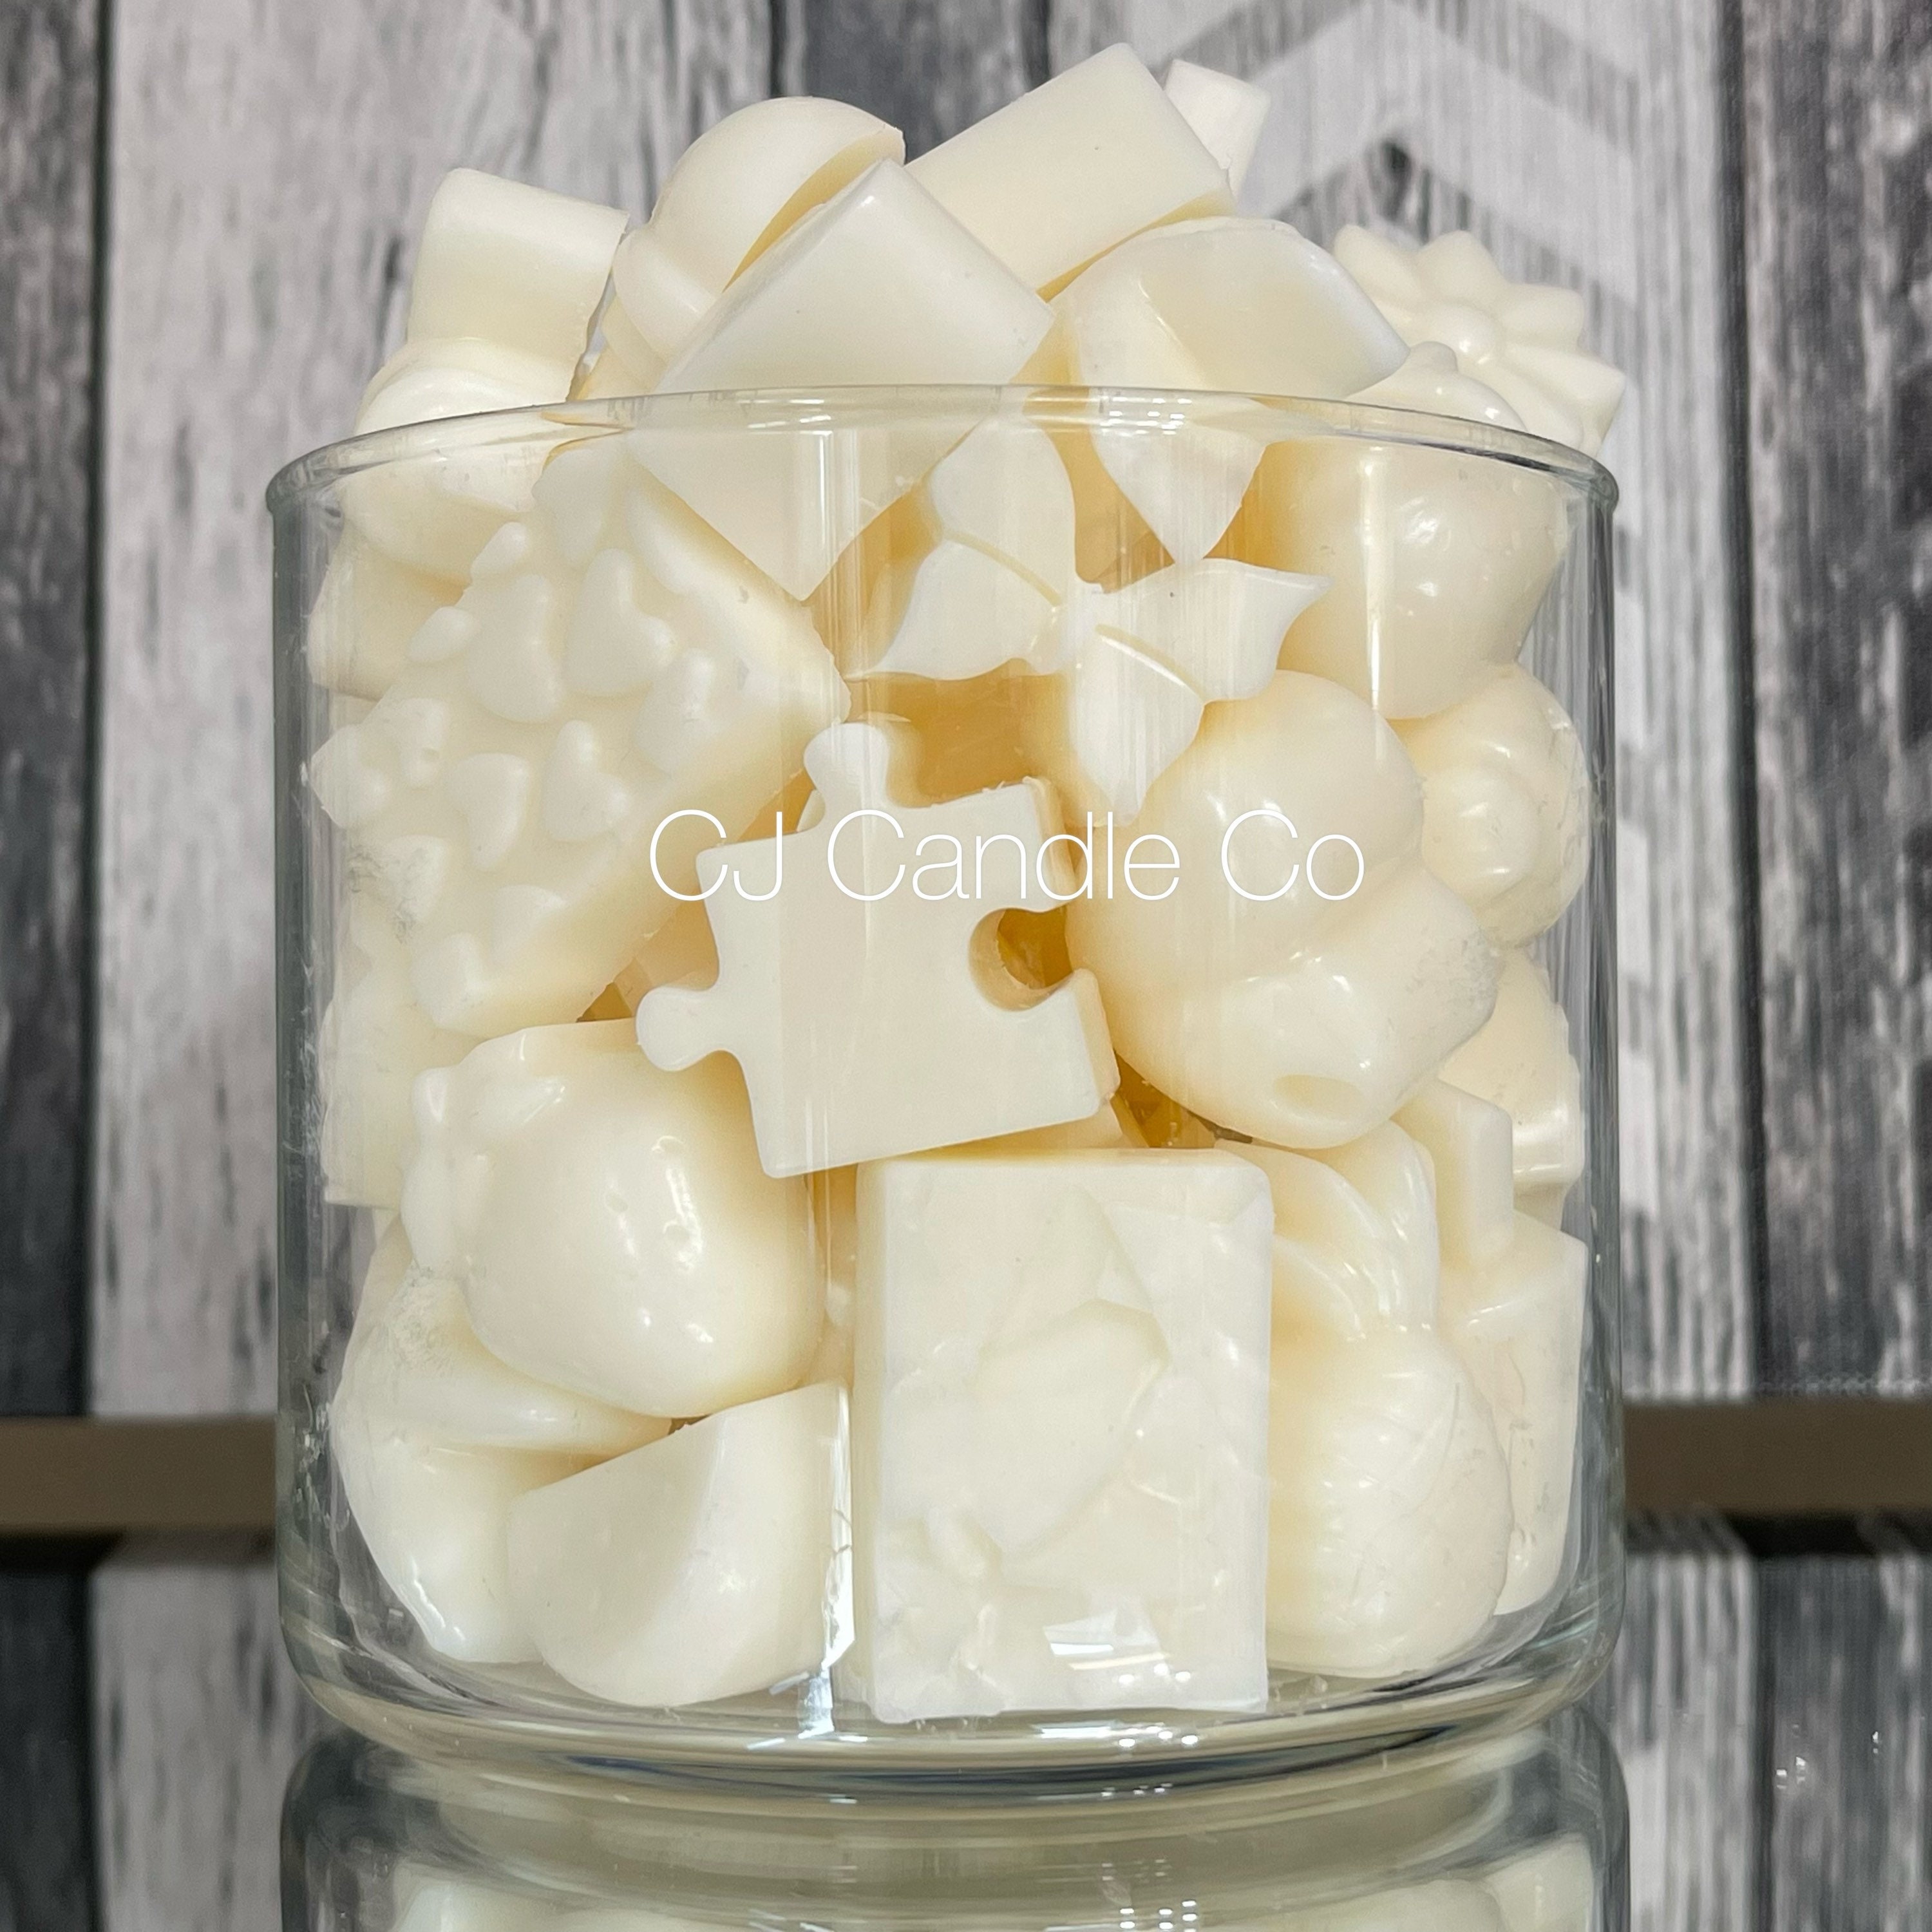 MILF Melts Into Lasting Fragrance - Sexy Spiked Apple Scent - Maximum  Lasting Wax Melt Cubes - 2 Ounces Unique Funny Gift for Women Men, BFF Best